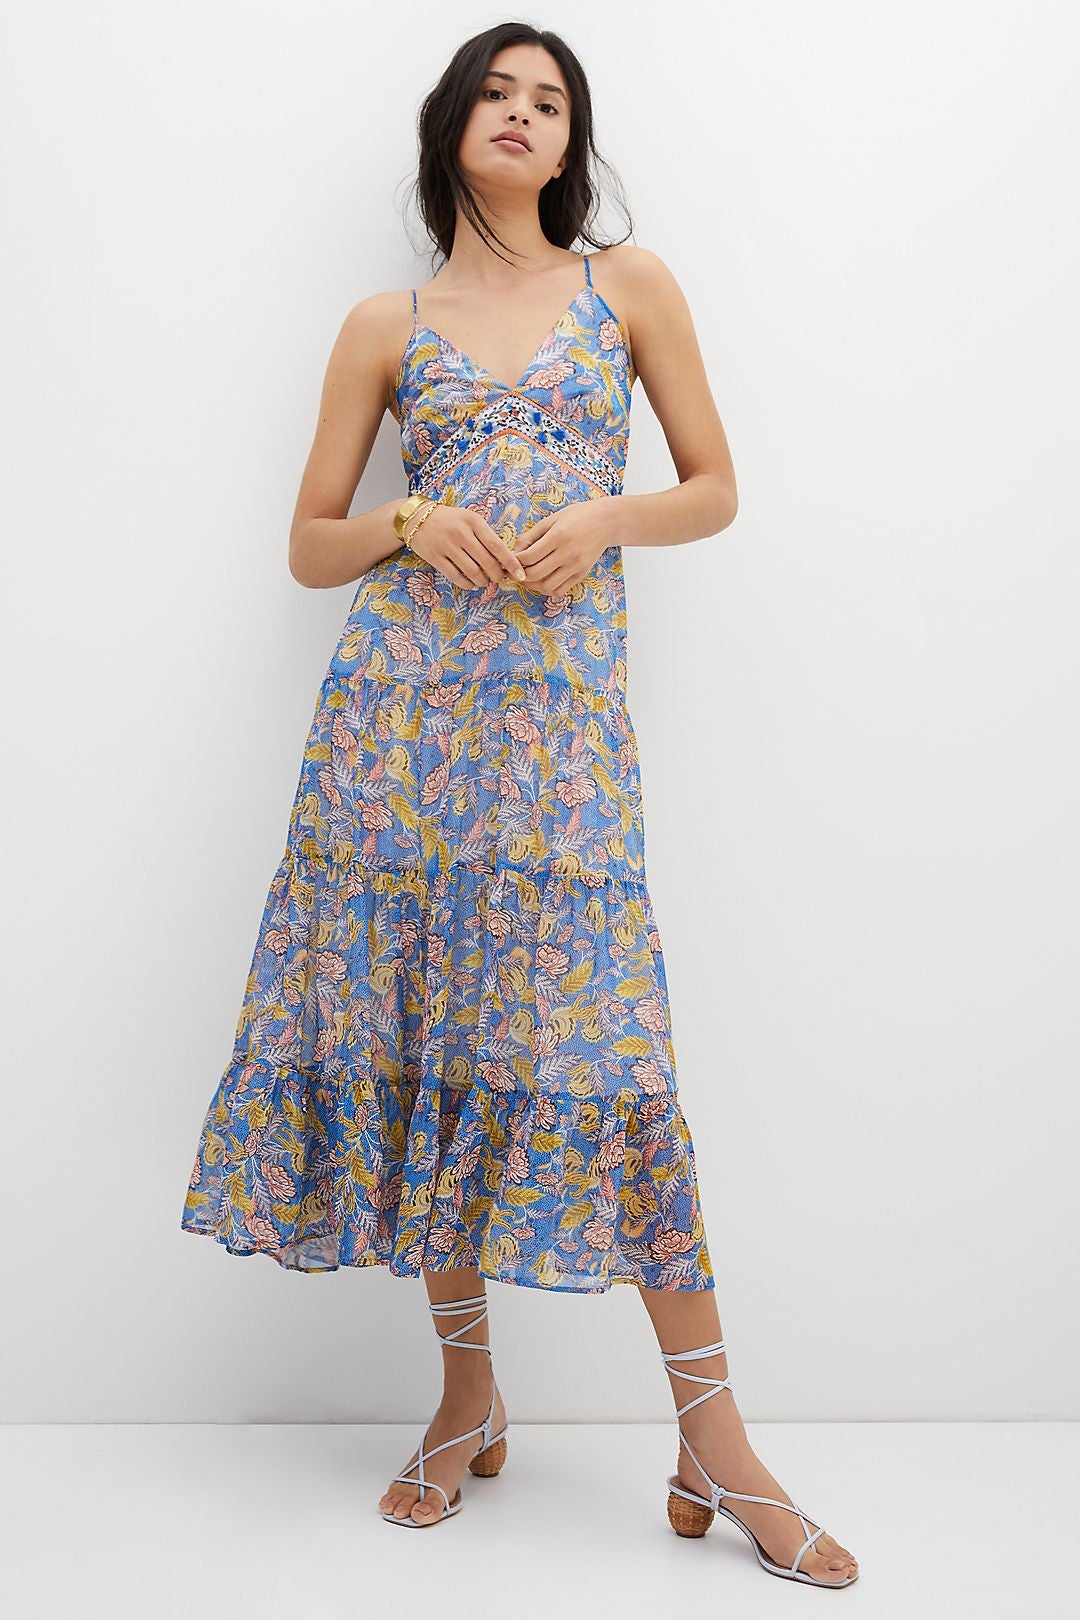 Model wearing light blue tiered maxi dress with yellow and pink leaves on it